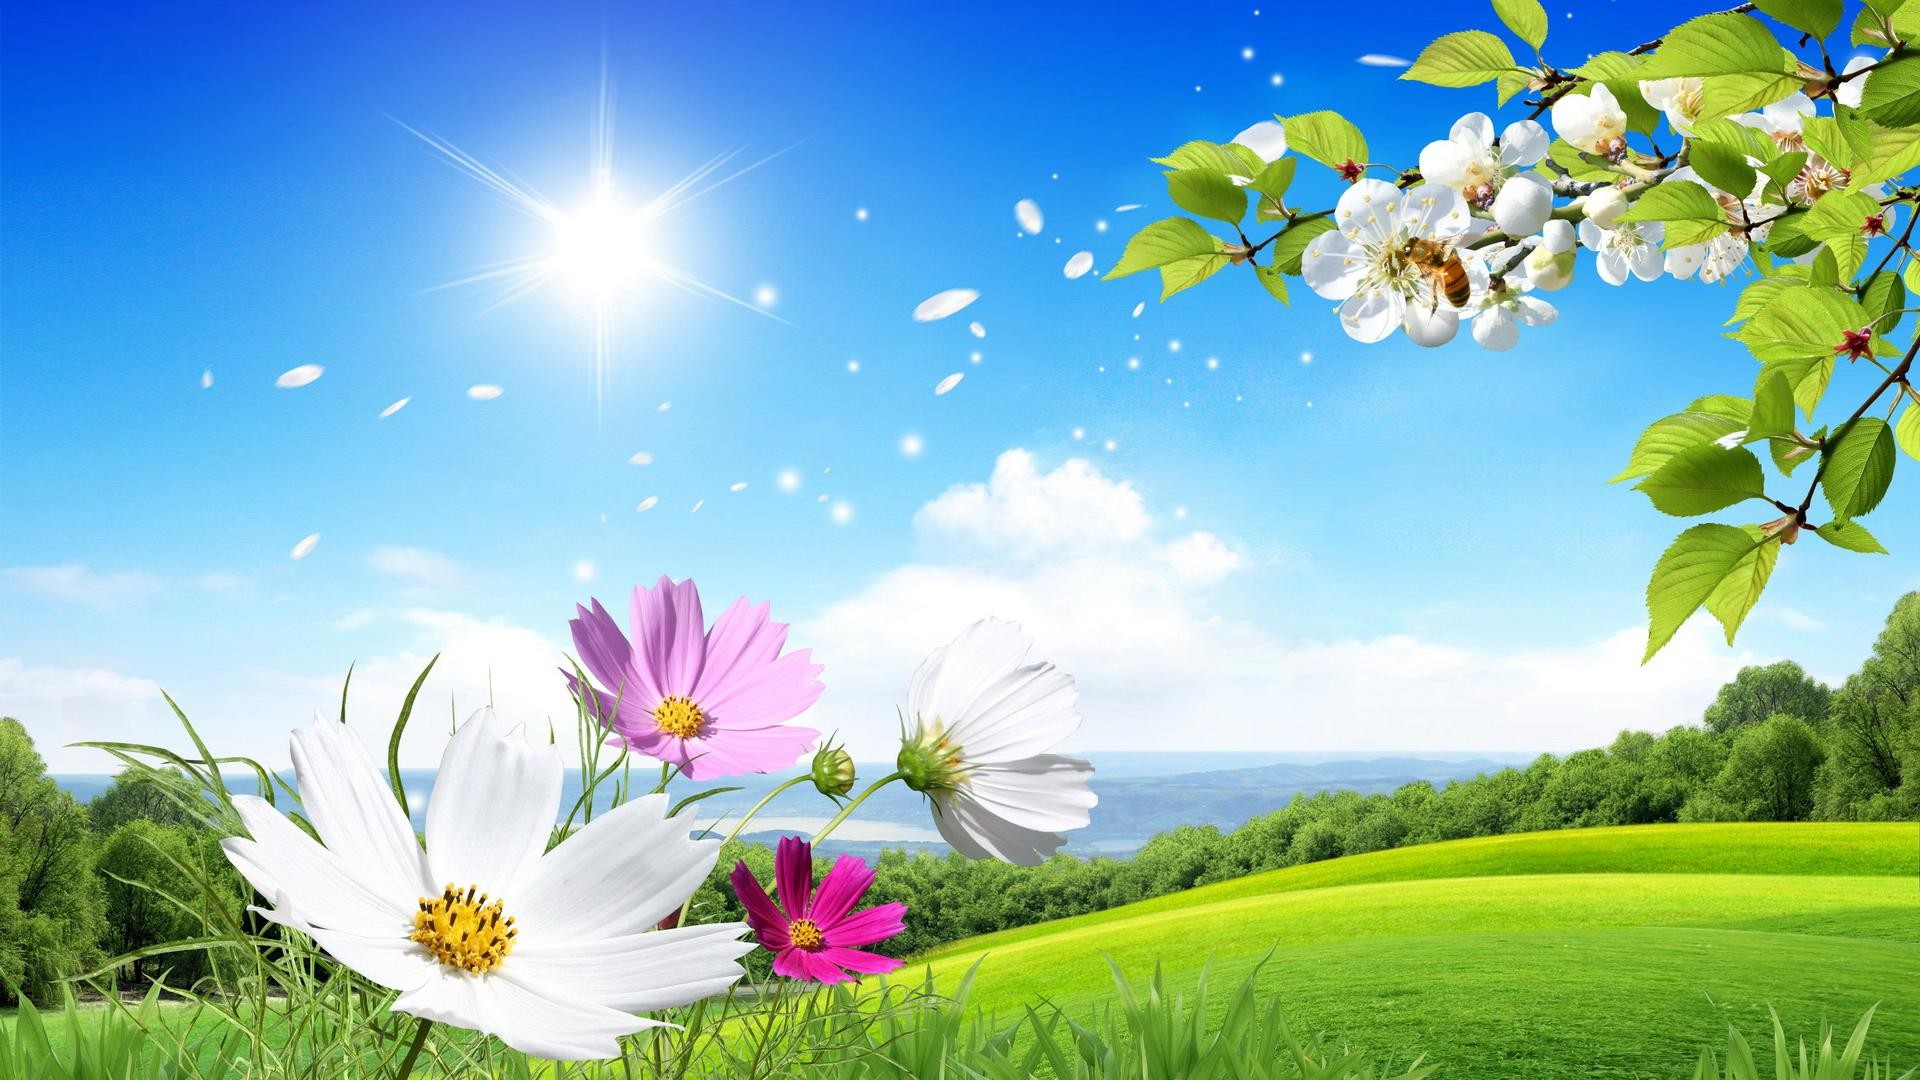 1920x1080  beautiful Summer and flowers scenery wallpaper wide  wallpapers:1280x800,1440x900,1680x1050 -